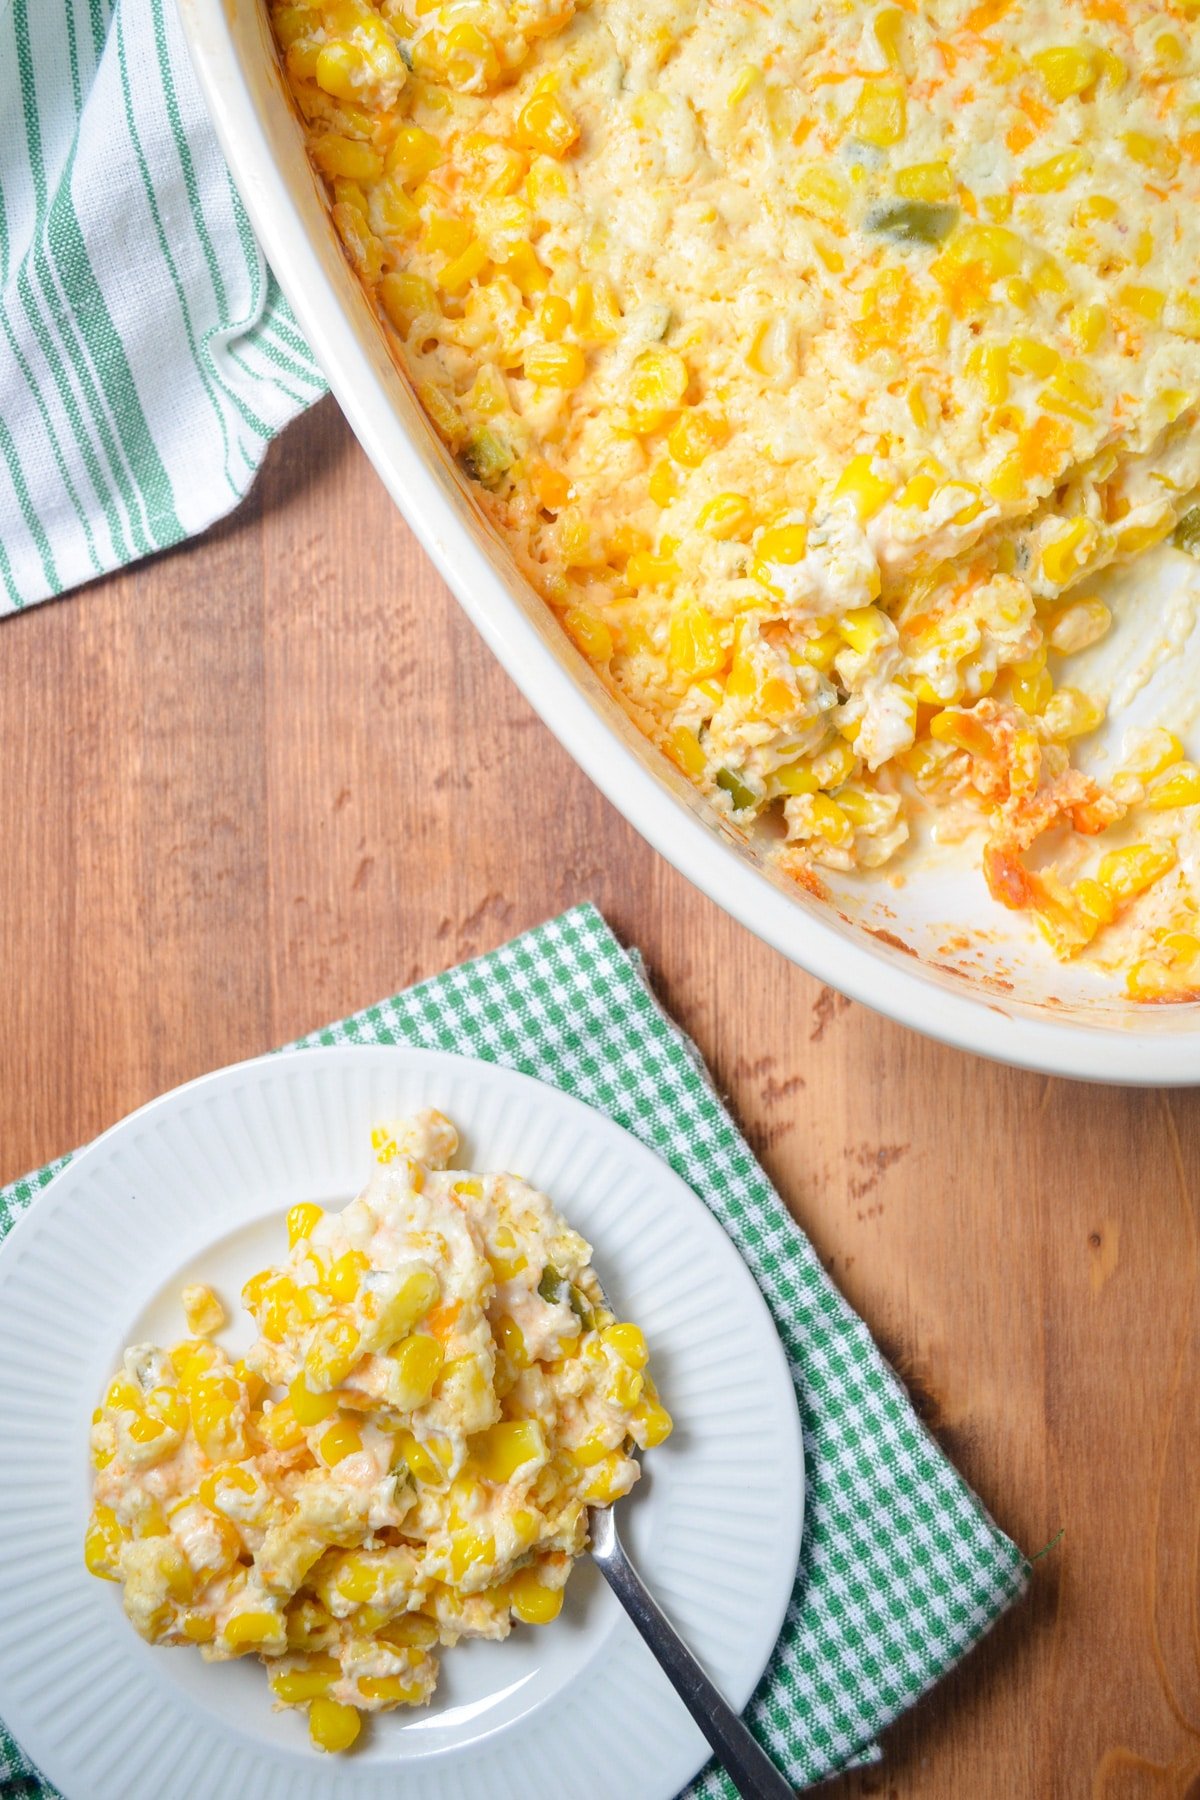 A plate full of corn casserole, with the serving dish nearby.